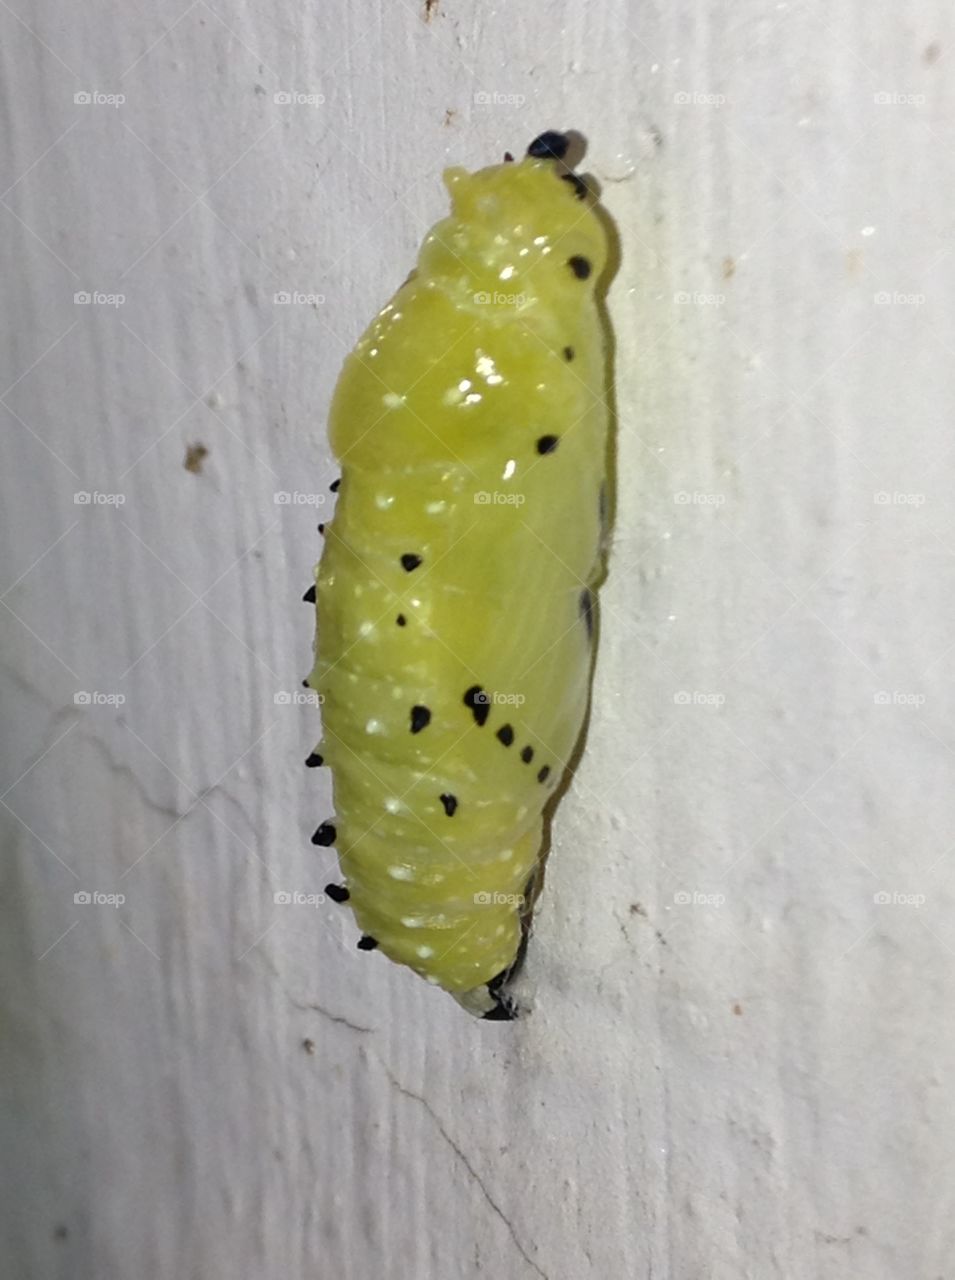 Cocoon (of a caterpillar) on wall